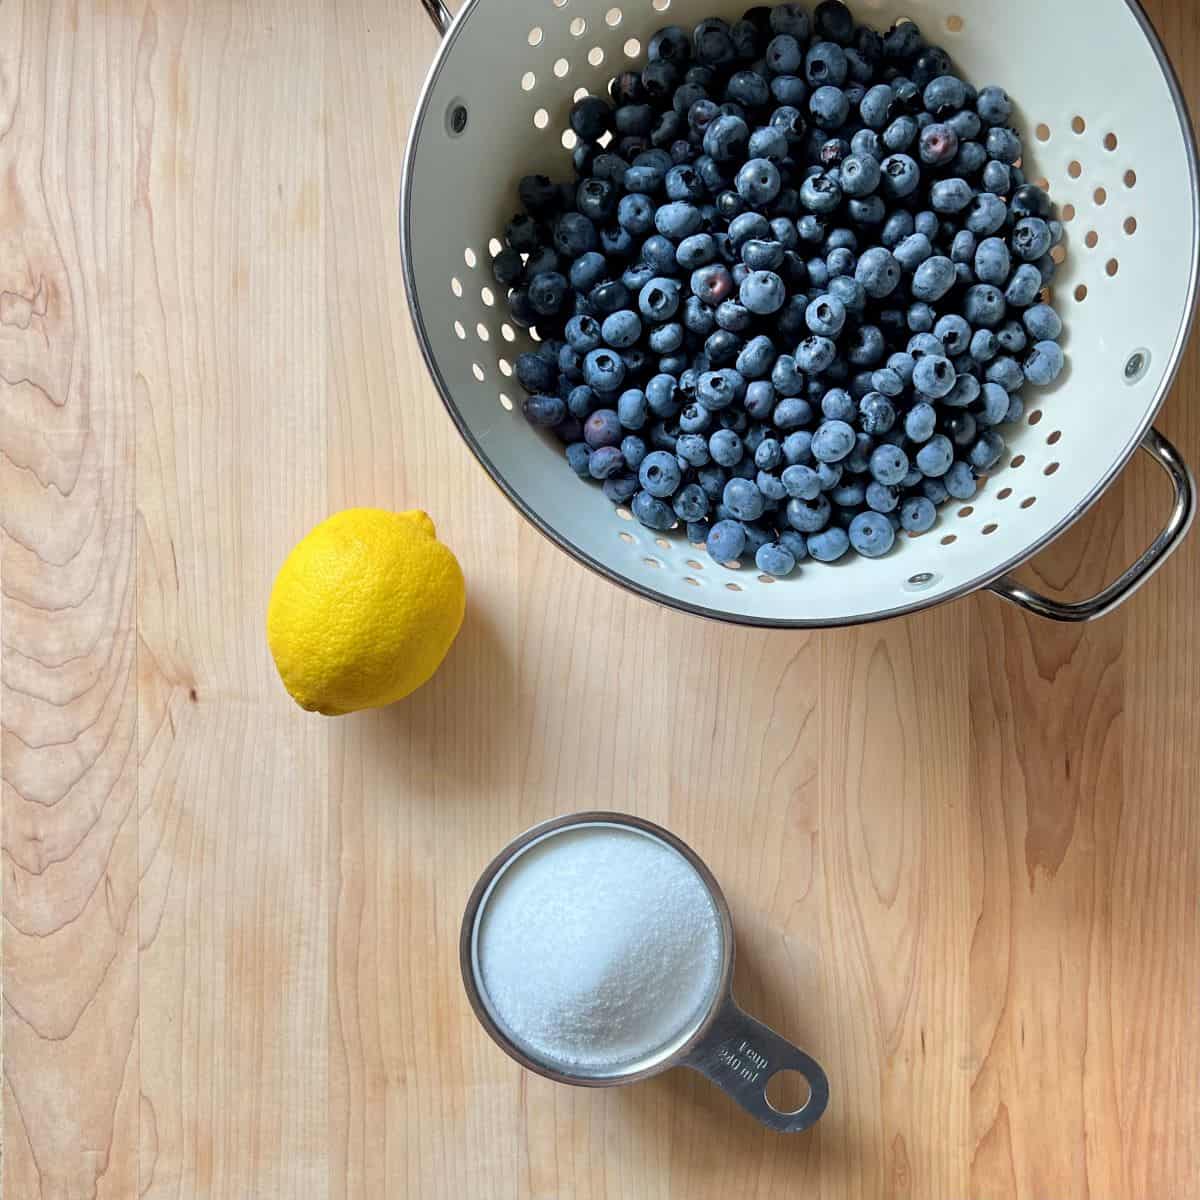 The ingredients to make blueberry jam on a wooden board.